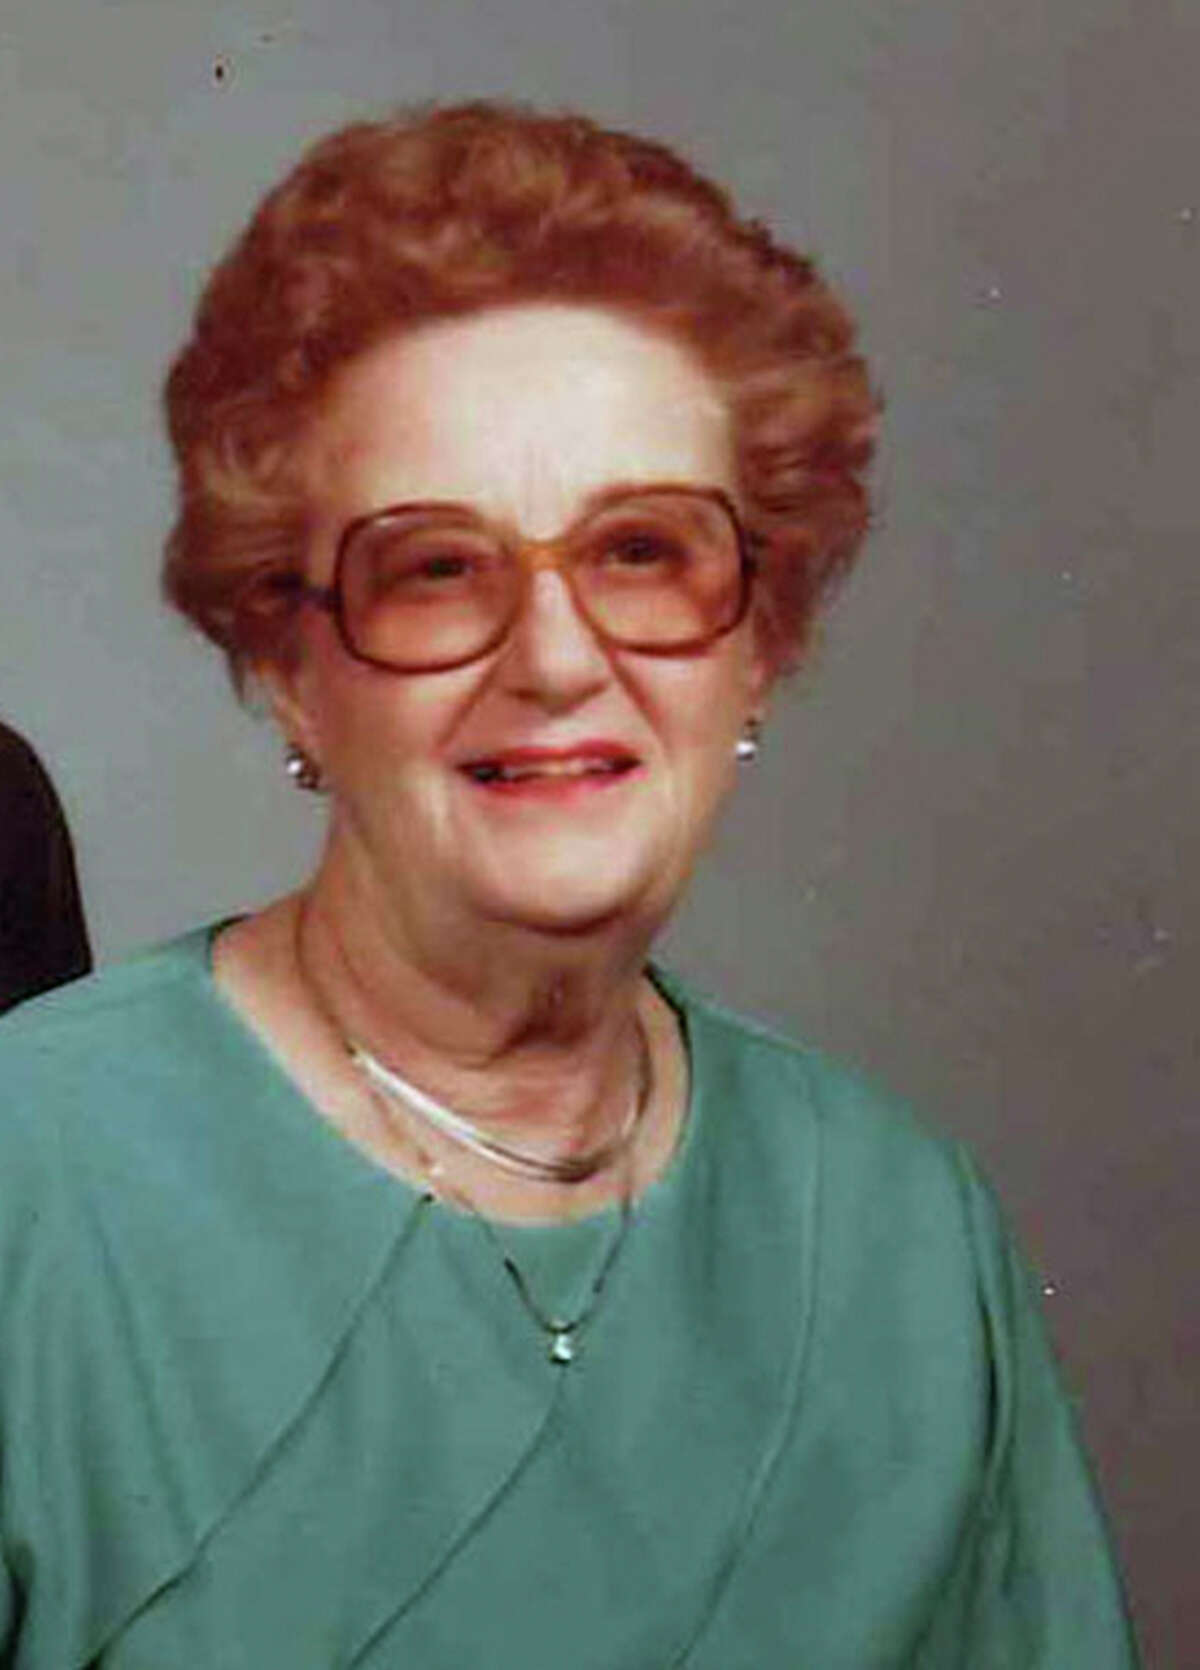 Lucille Meta Zuelecke Wohlfarth passed into eternal life on Friday, January 30, 2015, at the age of 94.